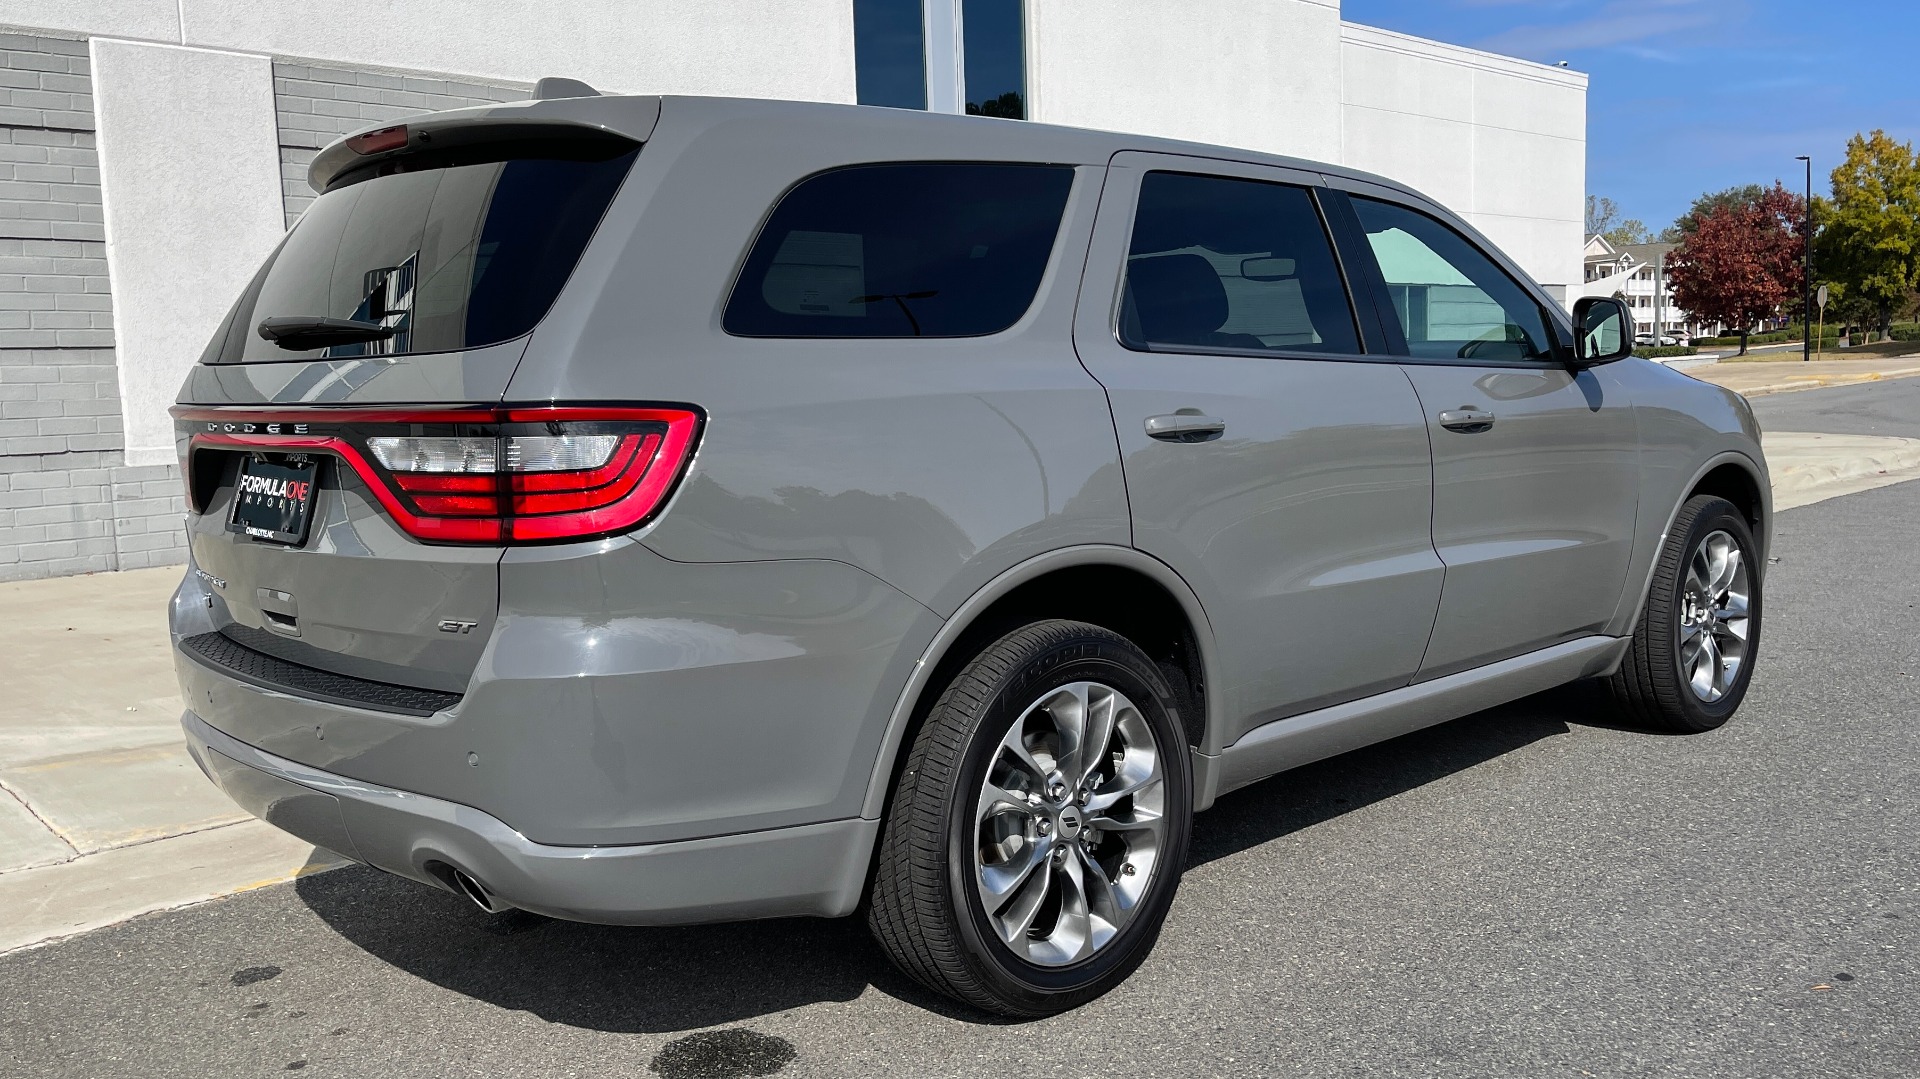 Used 2020 Dodge Durango GT PLUS AWD 3.6L / 8-SPD AUTO / ALPINE / 3-ROW / REARVIEW for sale $34,500 at Formula Imports in Charlotte NC 28227 8